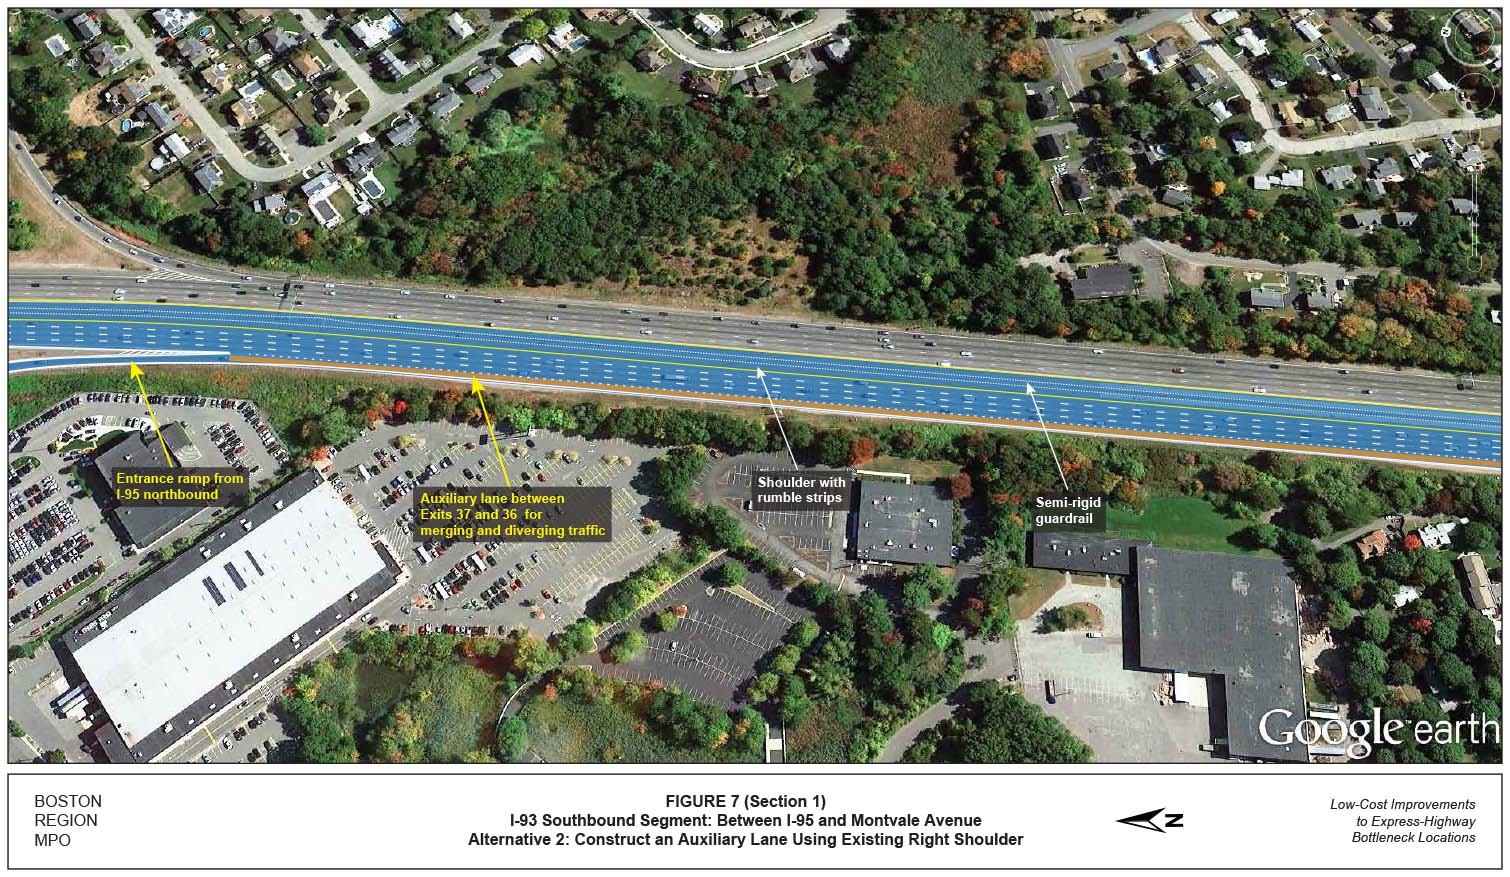 FIGURE 7. Aerial-view map showing “Improvement Alternative 2,” which recommends constructing an auxiliary lane using the existing right shoulder on the I-93 southbound segment between I-95 and Montvale Avenue